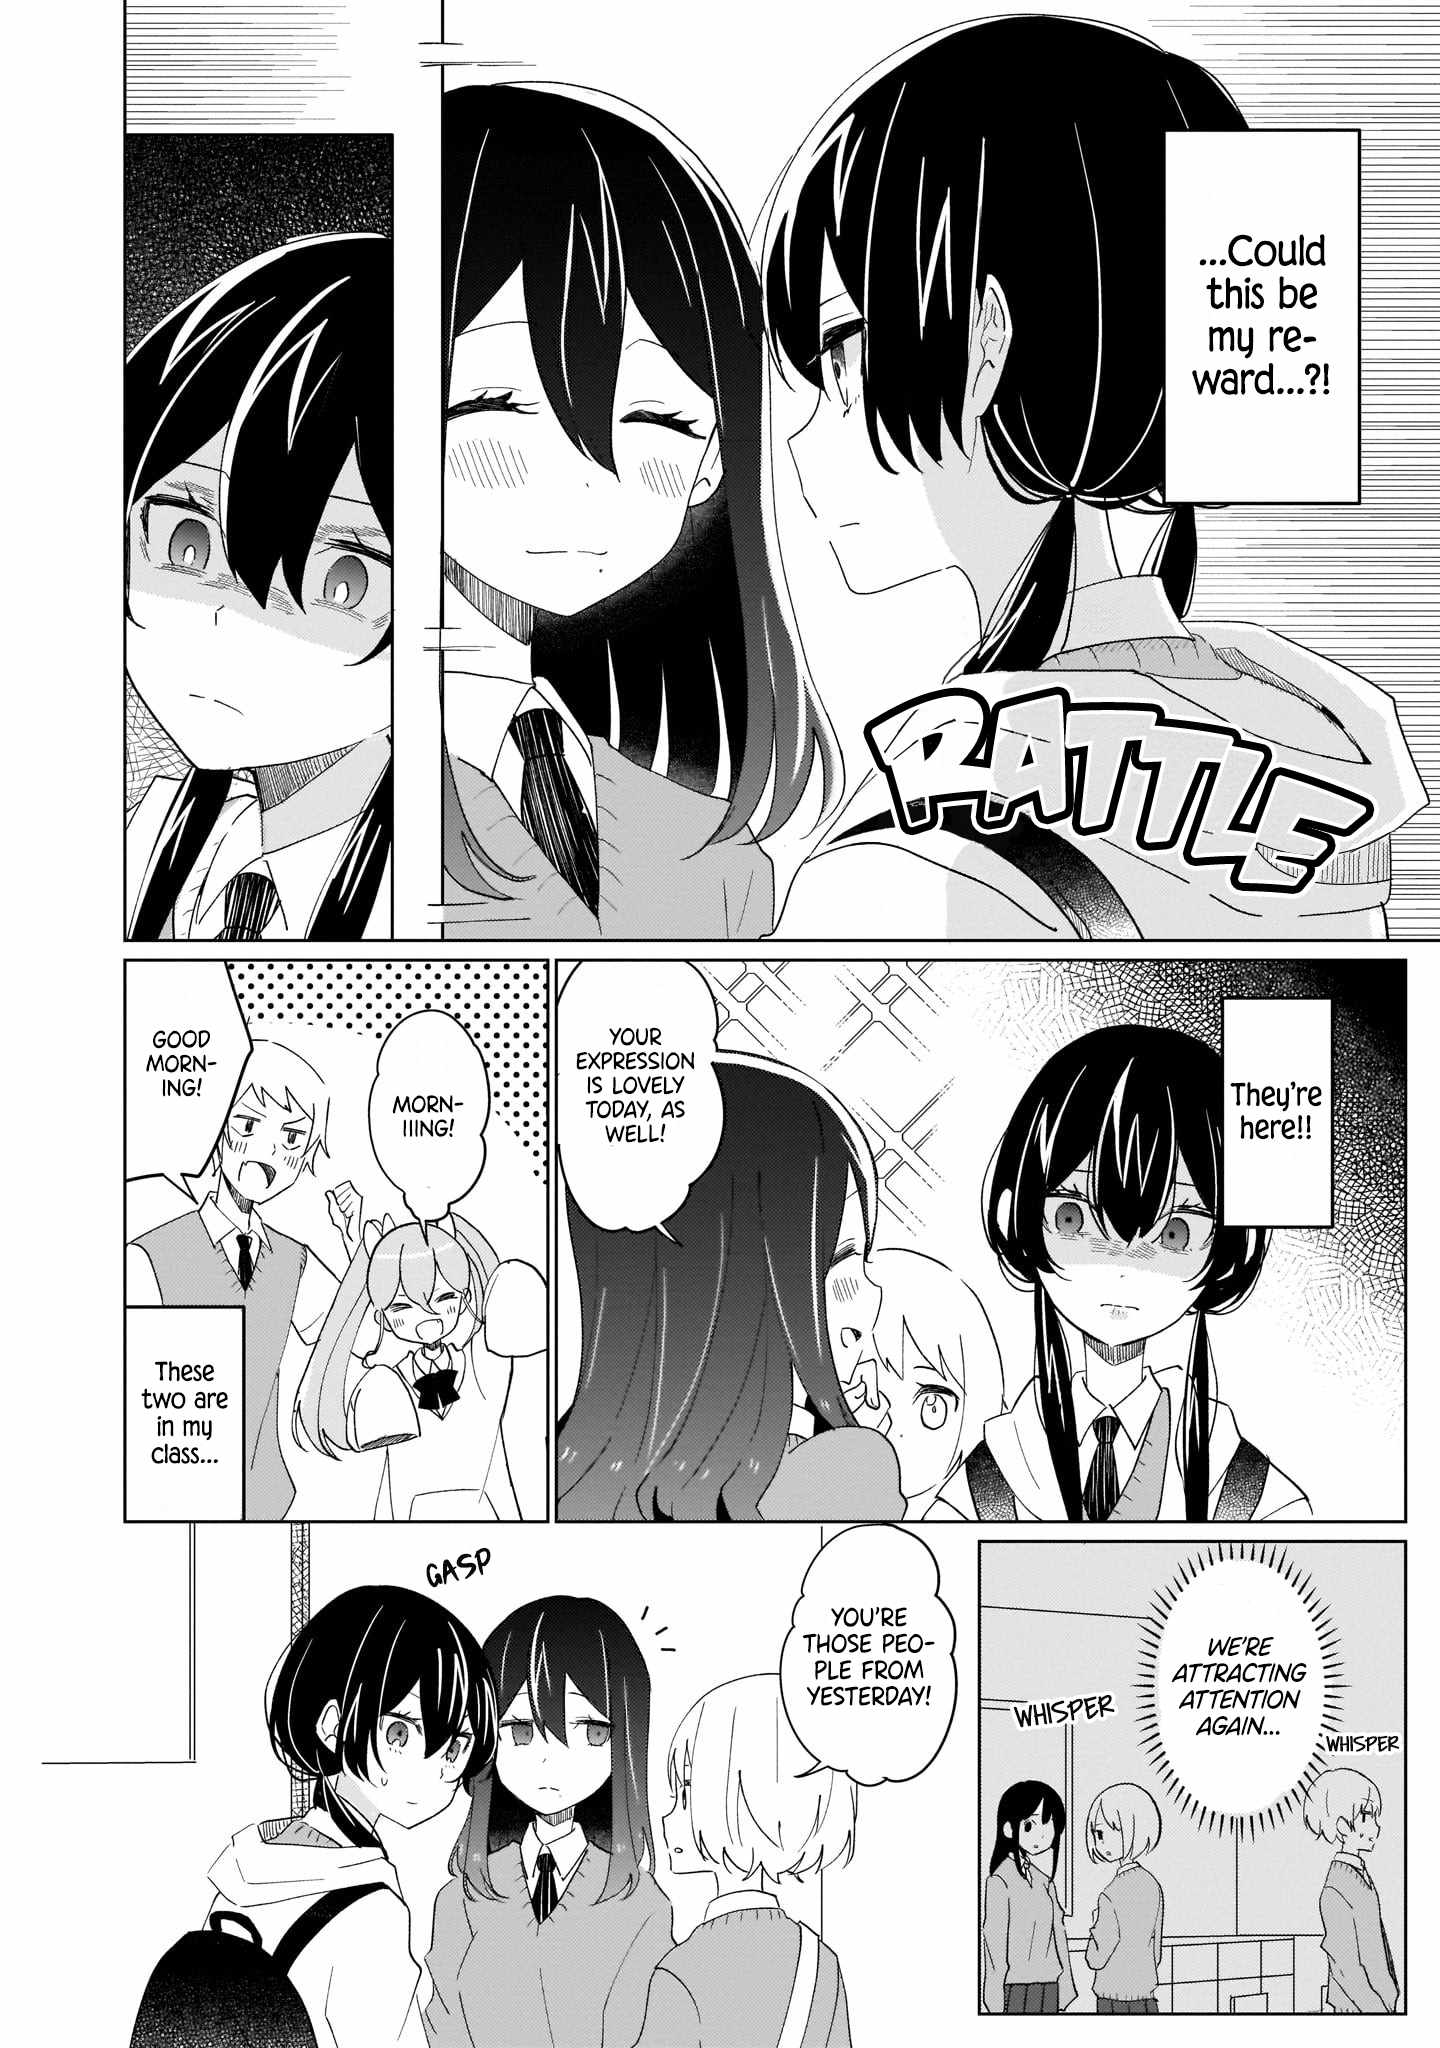 The Demon Lord's Love Life Isn't Going Well Chapter 2